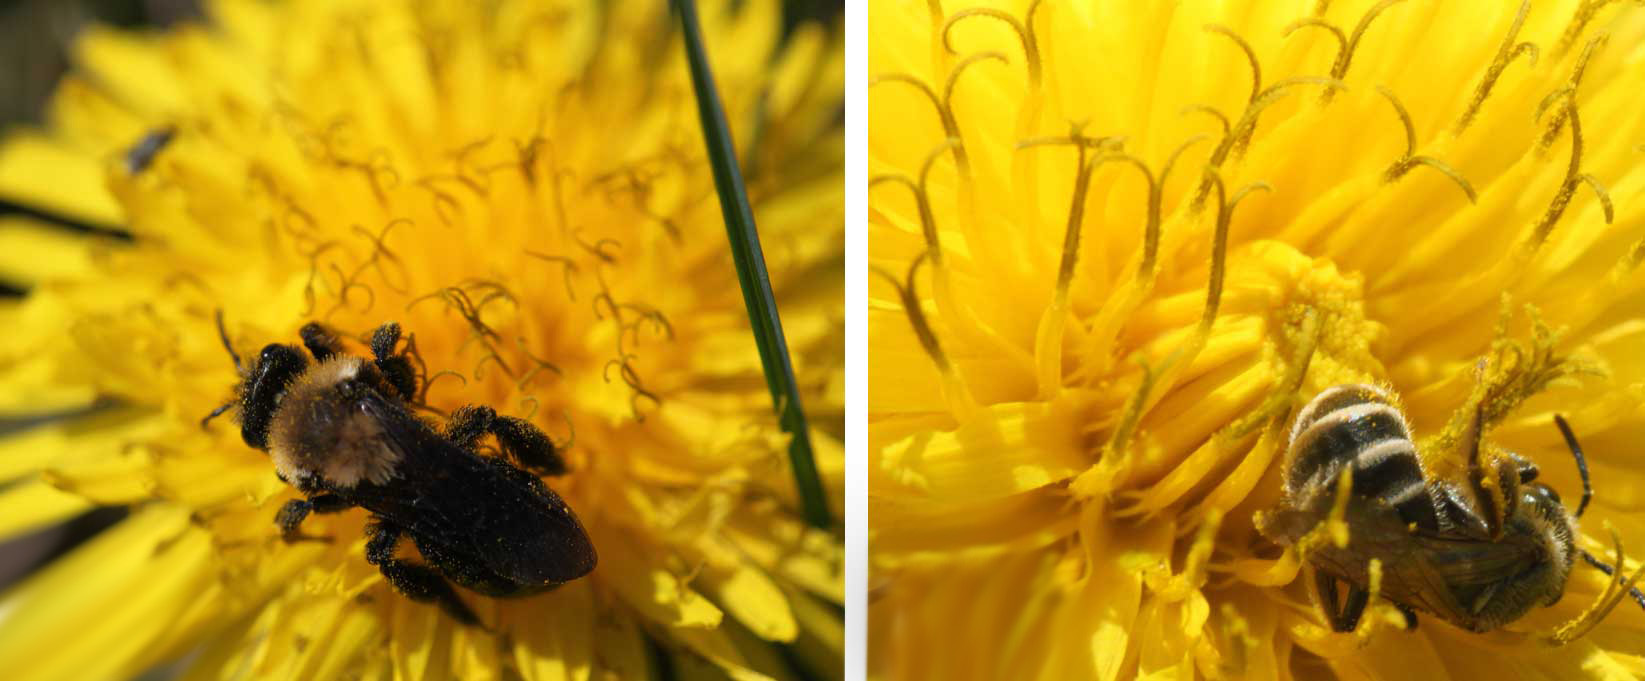 Two dandeloins side by side. The left has a bee with a very fuzzy yellow thorax and dark wings and abdomen foraging on it. The right has a bee with with a black and pale-yellow striped abdomen resting foraging on it.